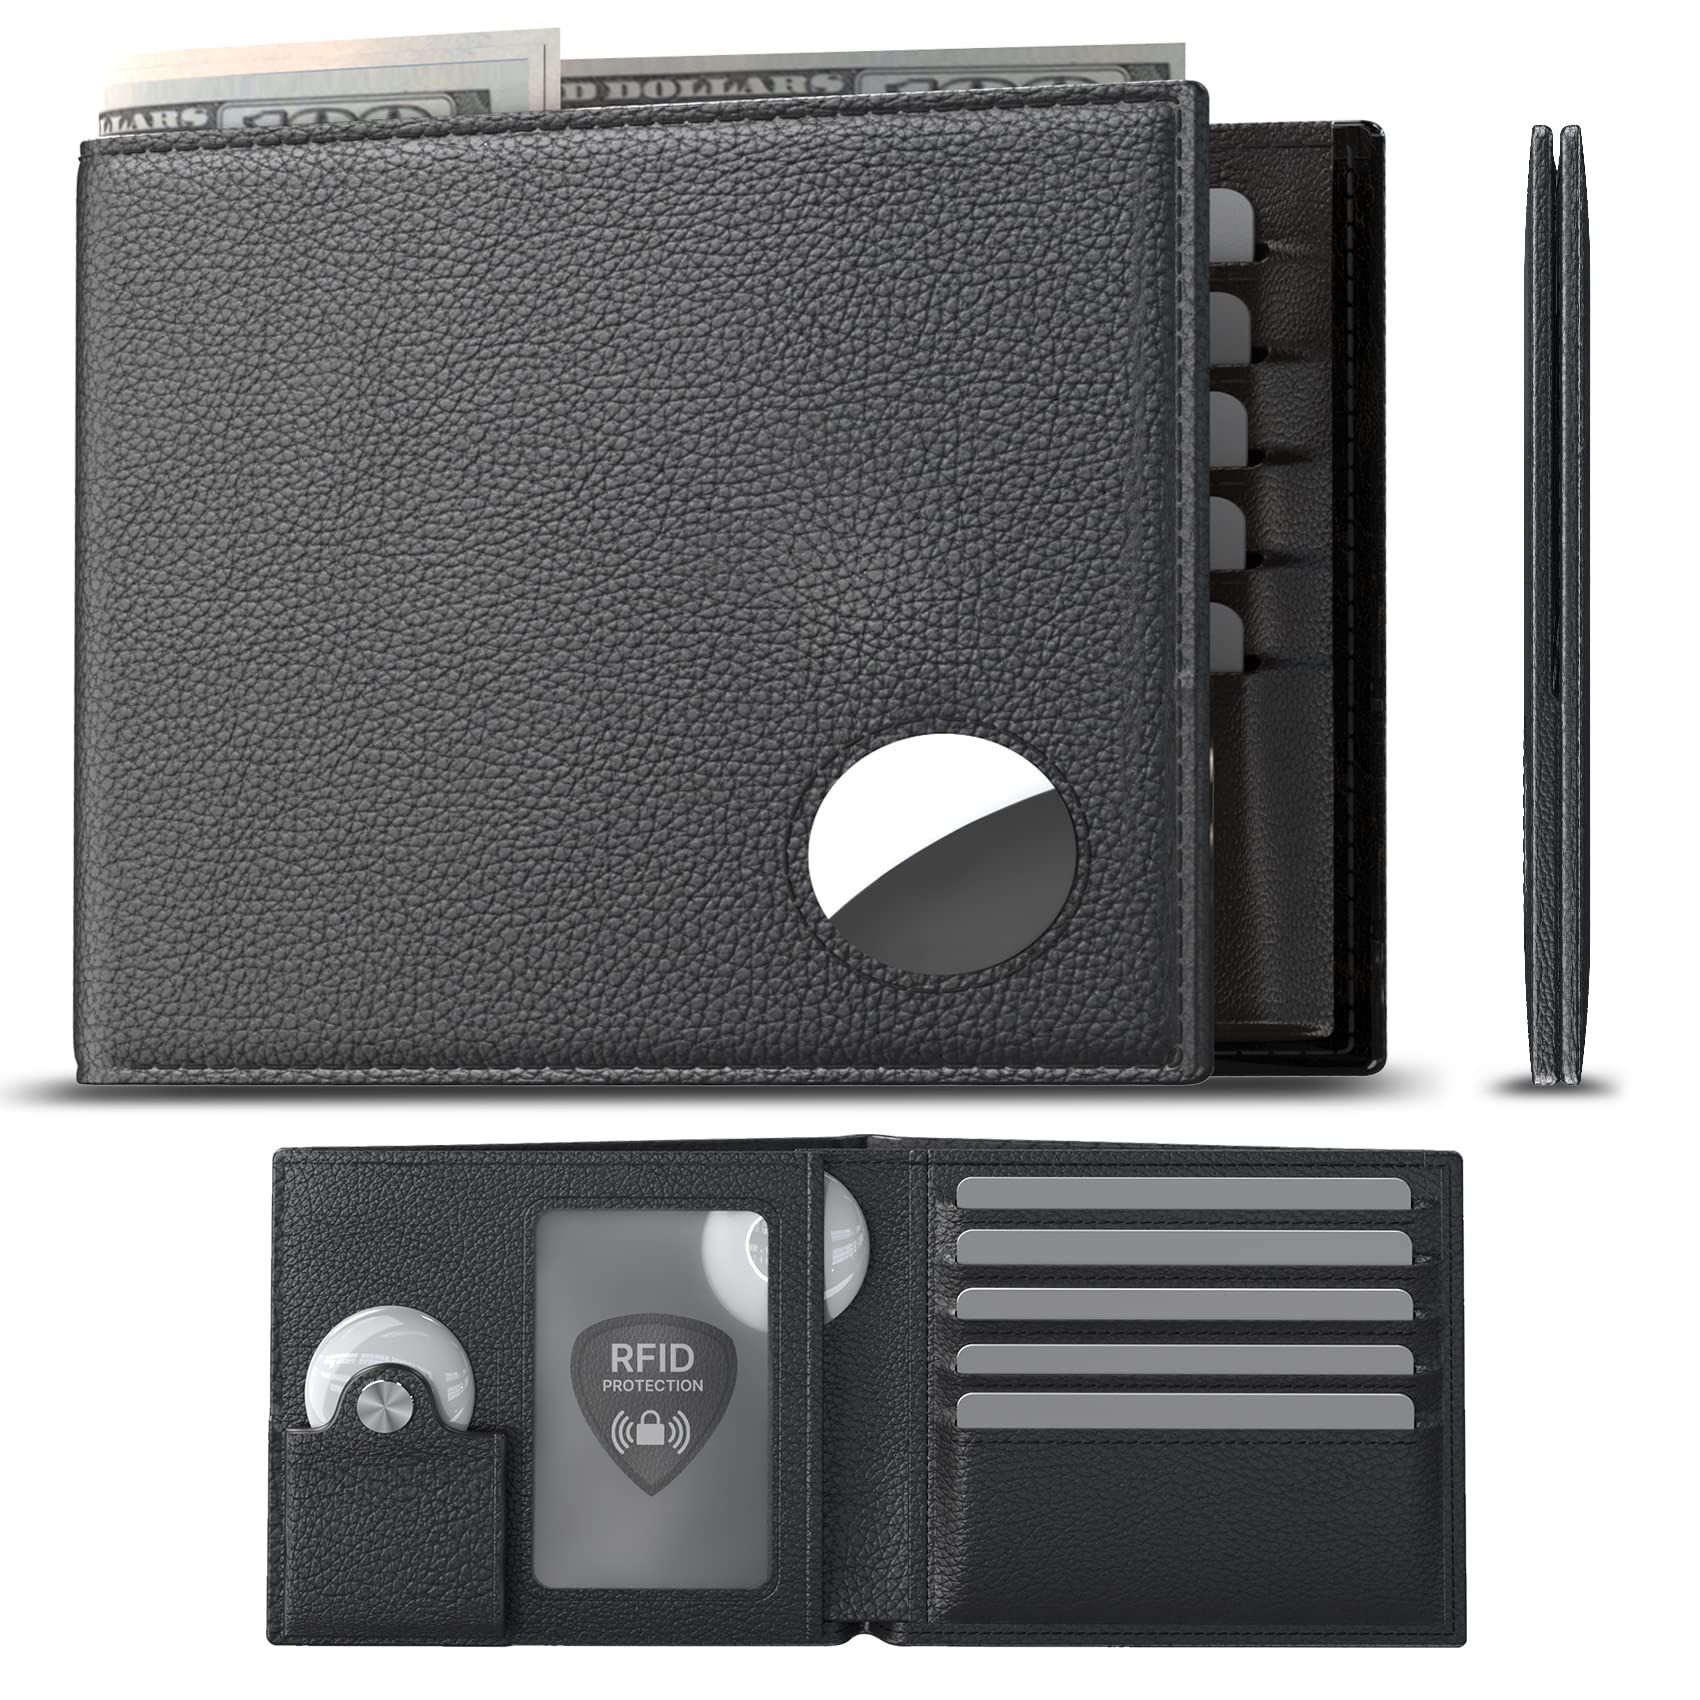 S1 STEALTH™ WALLET - Dango Products